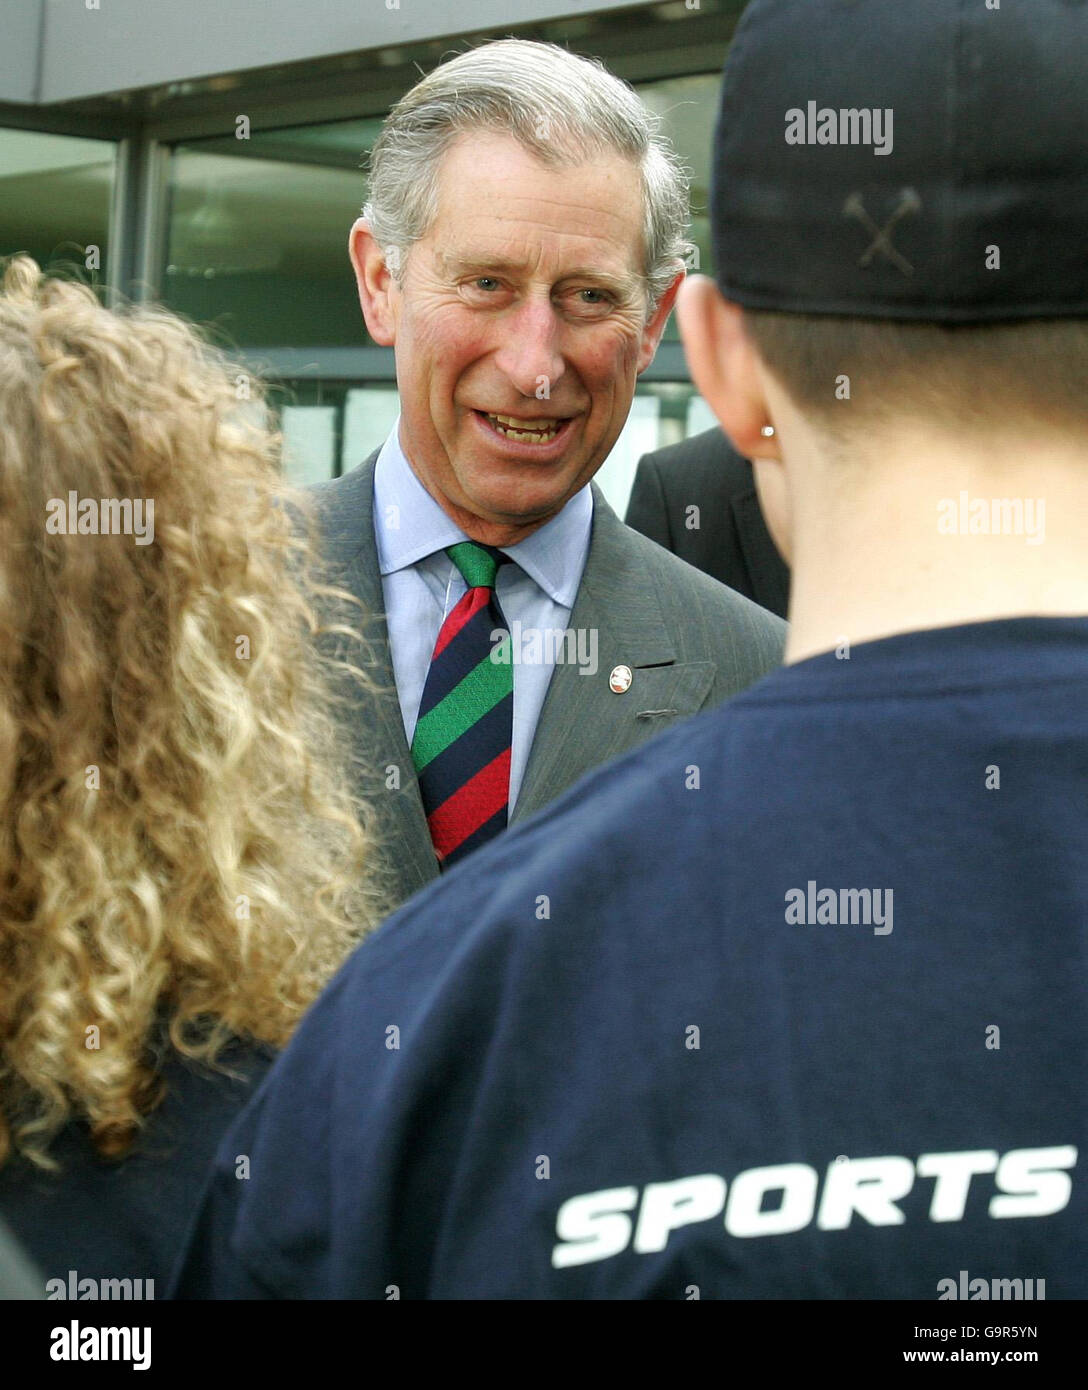 Prince of Wales visit to Essex Stock Photo - Alamy